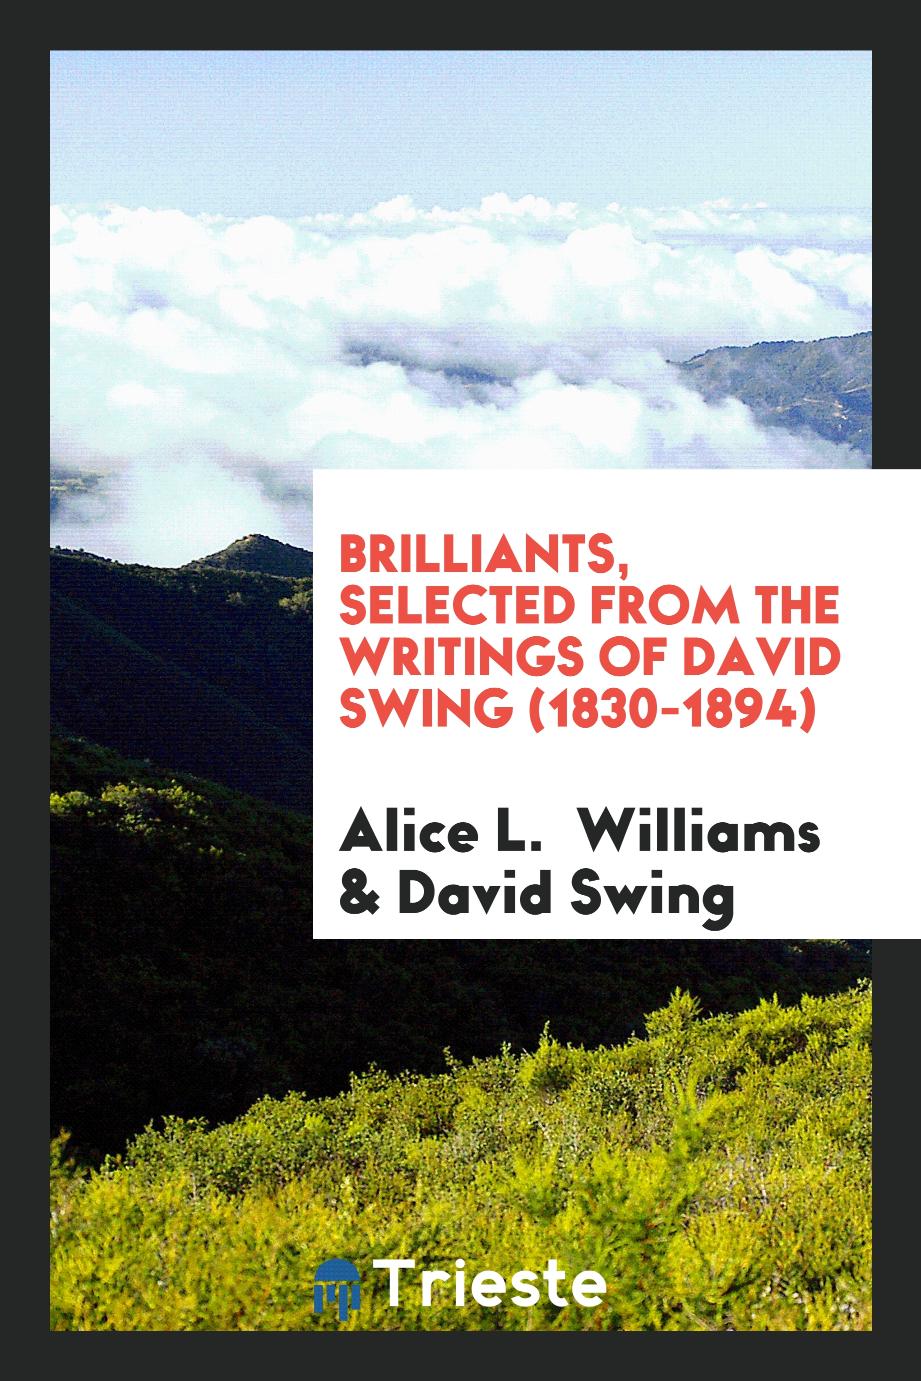 Brilliants, selected from the writings of David Swing (1830-1894)